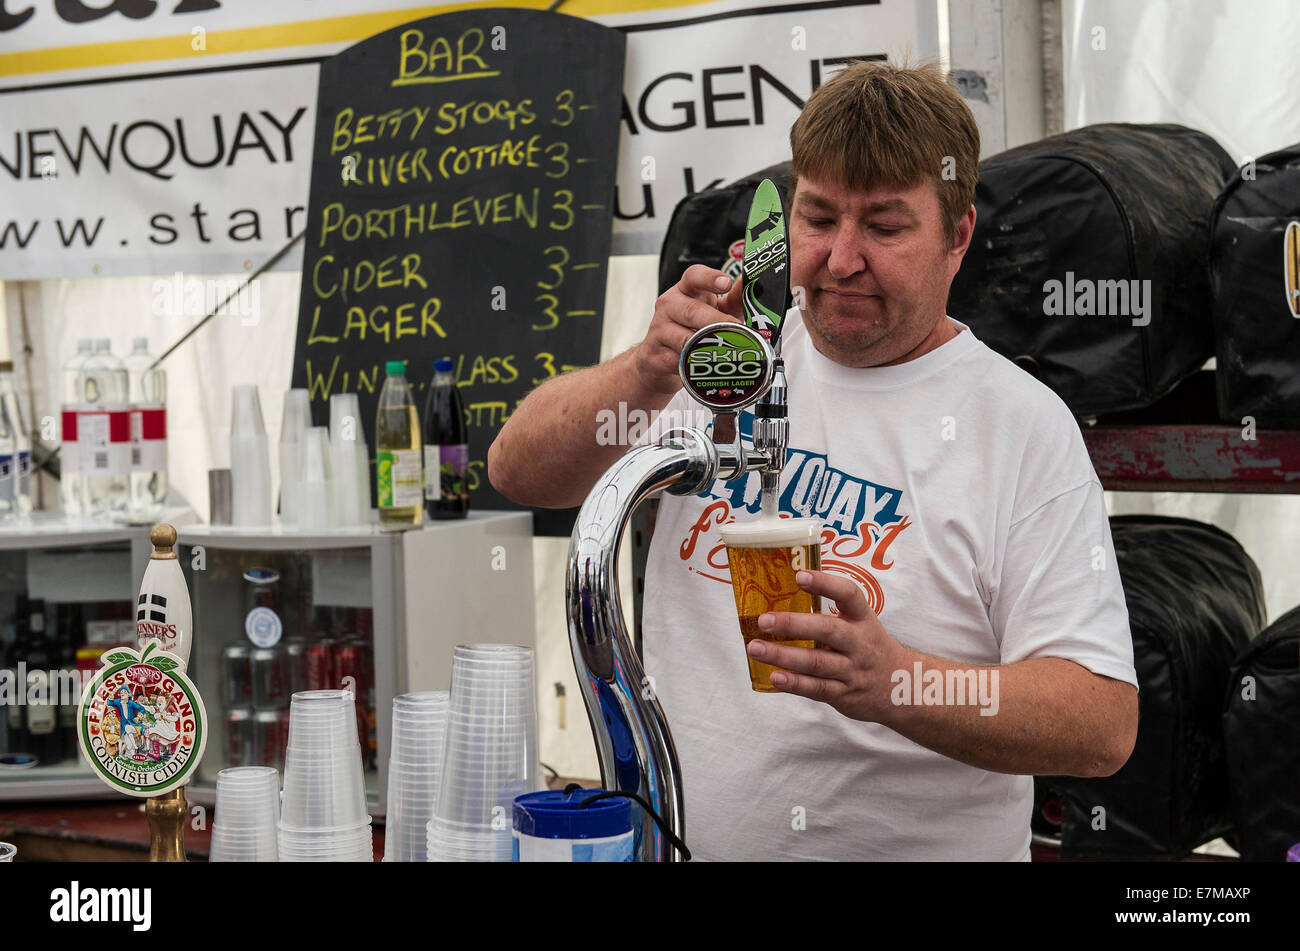 Barstaff pouring a pint of beer at the Newquay Fish Festival in Newquay Harbour. Stock Photo